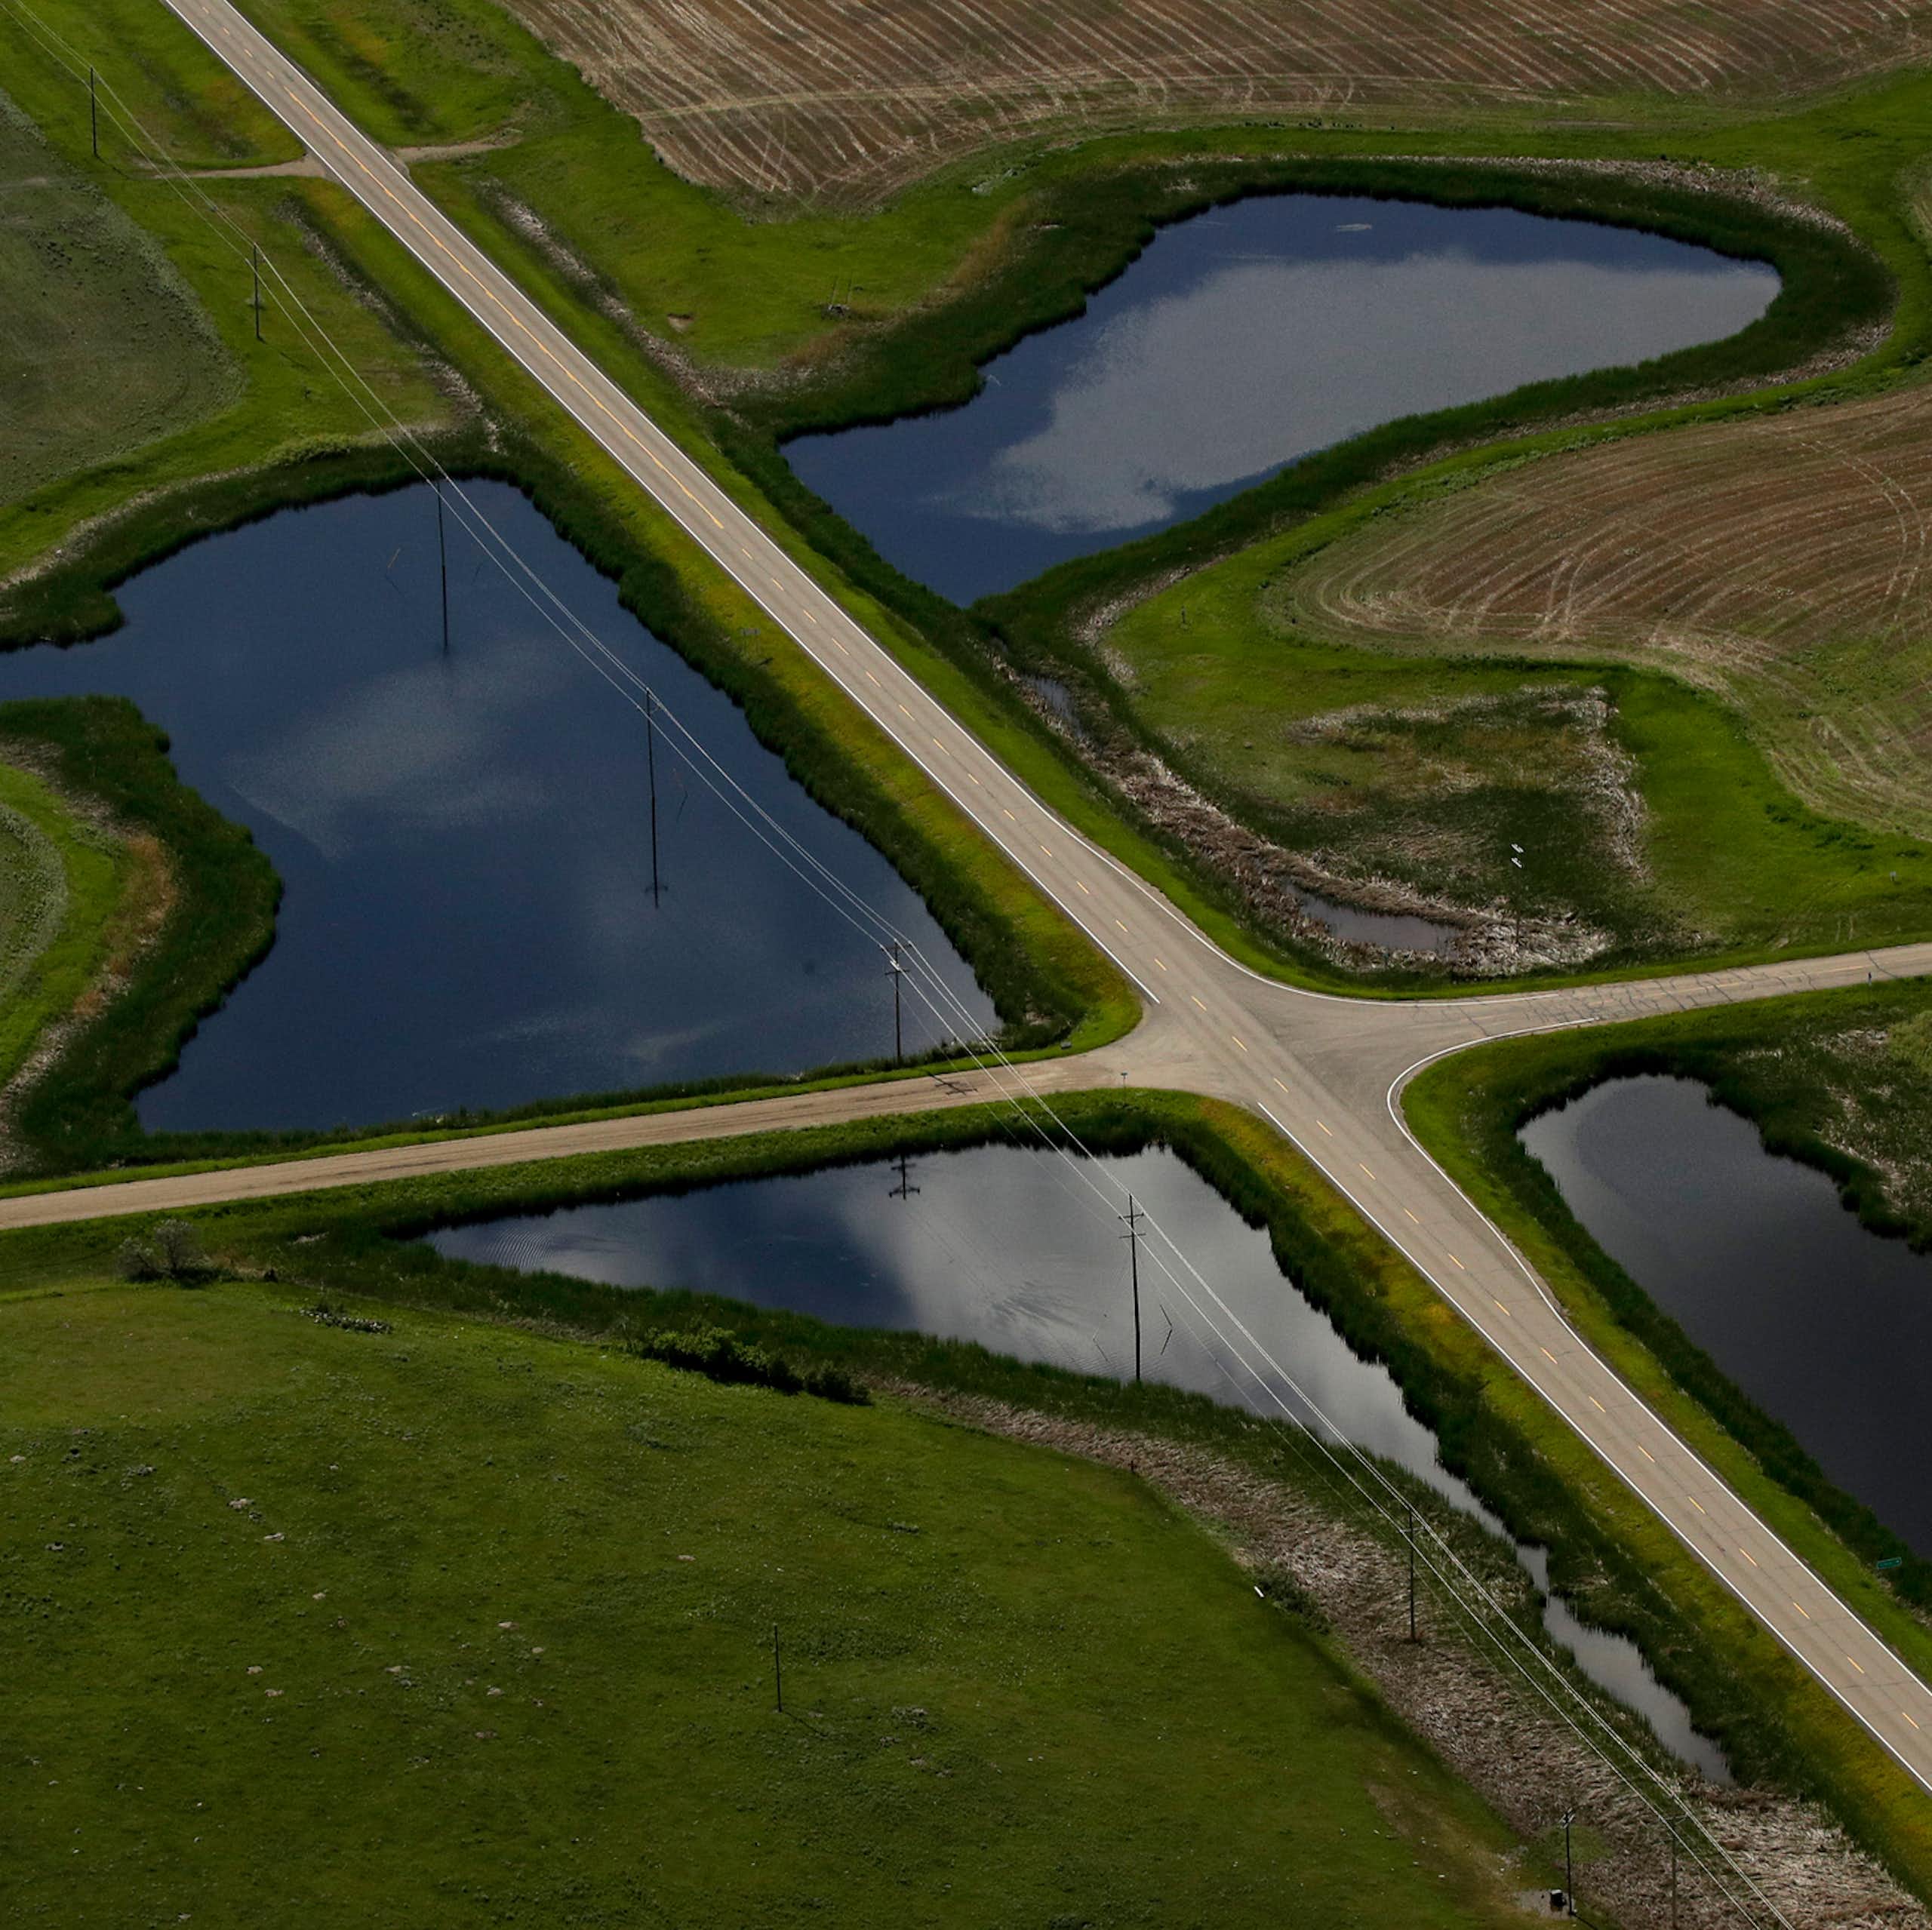 Two roads intersect, dividing a large pond into four smaller sections